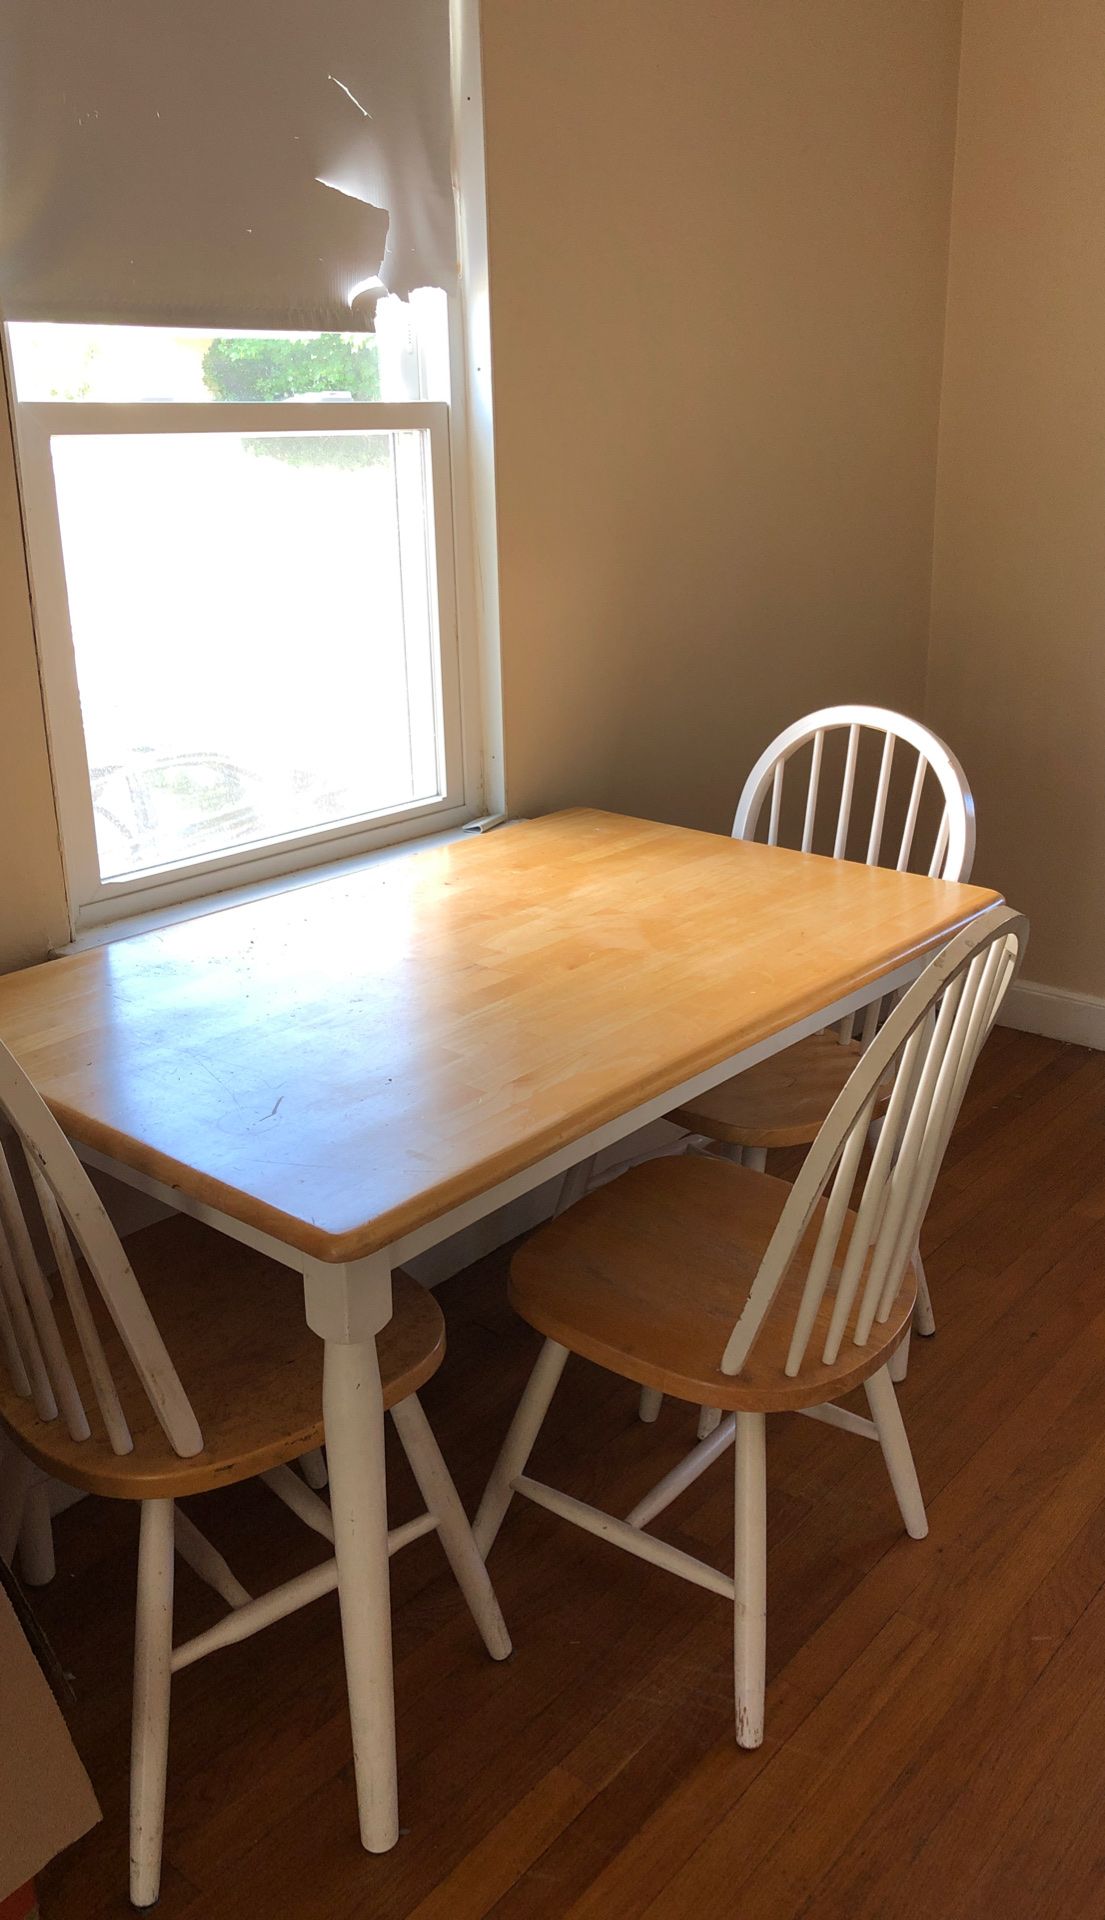 Dining Room Table and 3 chairs!